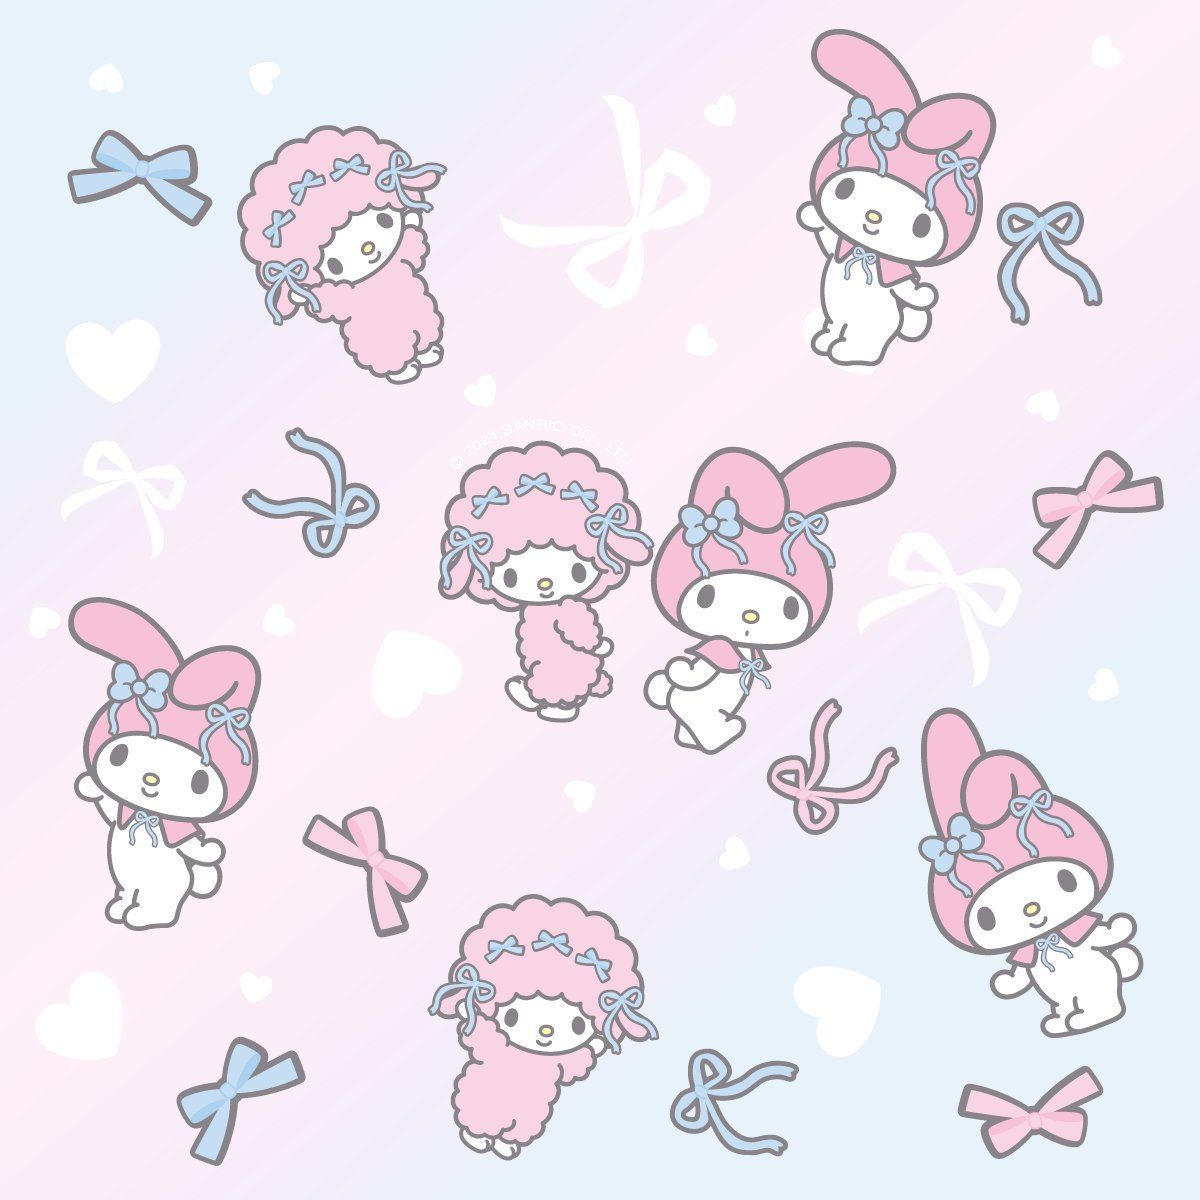 My Melody is a character from the Sanrio company. She is a pink and white rabbit who loves to eat cotton candy. She is very curious and loves to explore new things. - My Melody